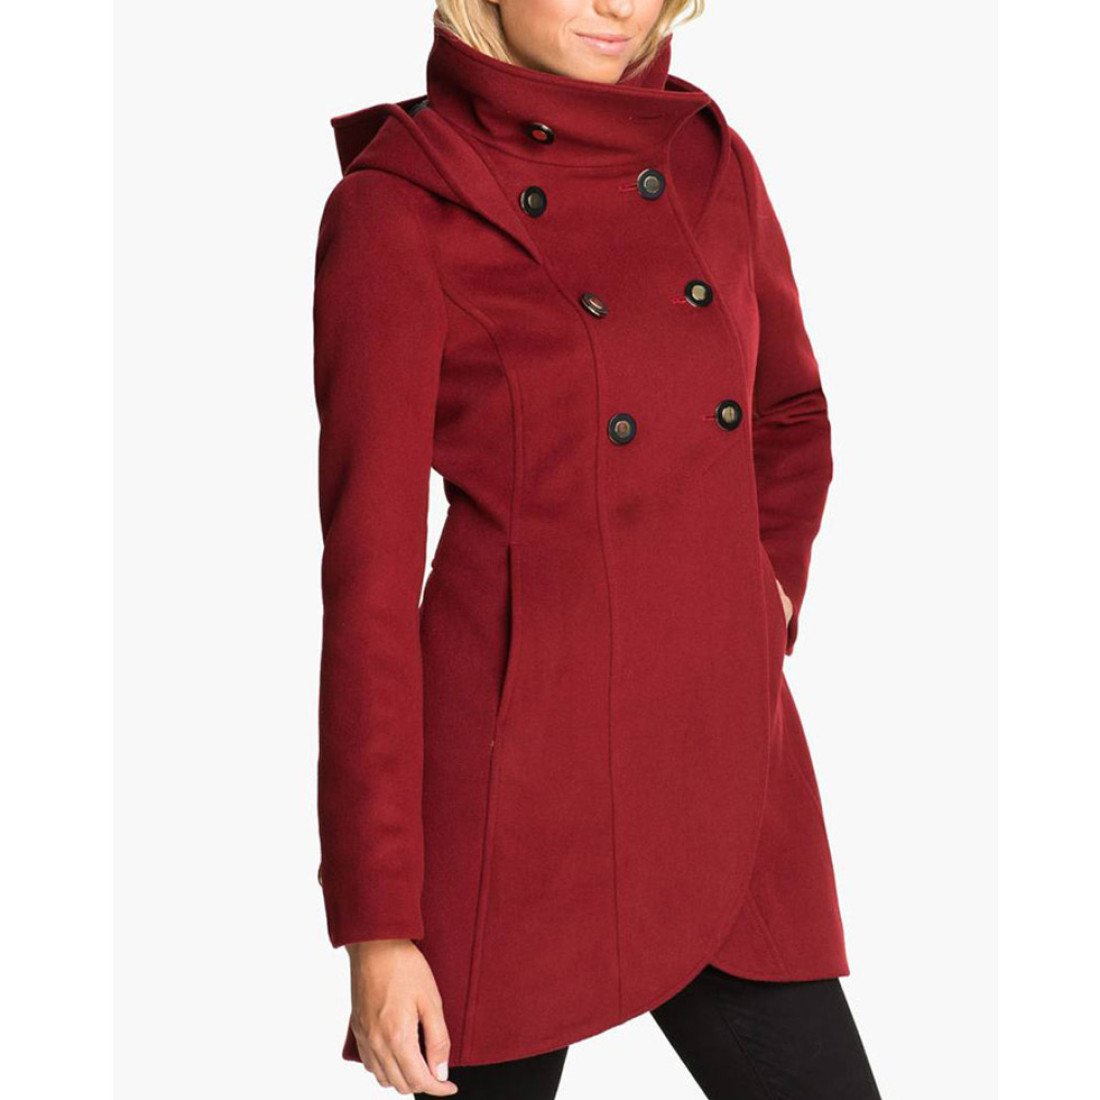 Double Breasted Once Upon a Time Emma Swan Red Coat - Films Jackets